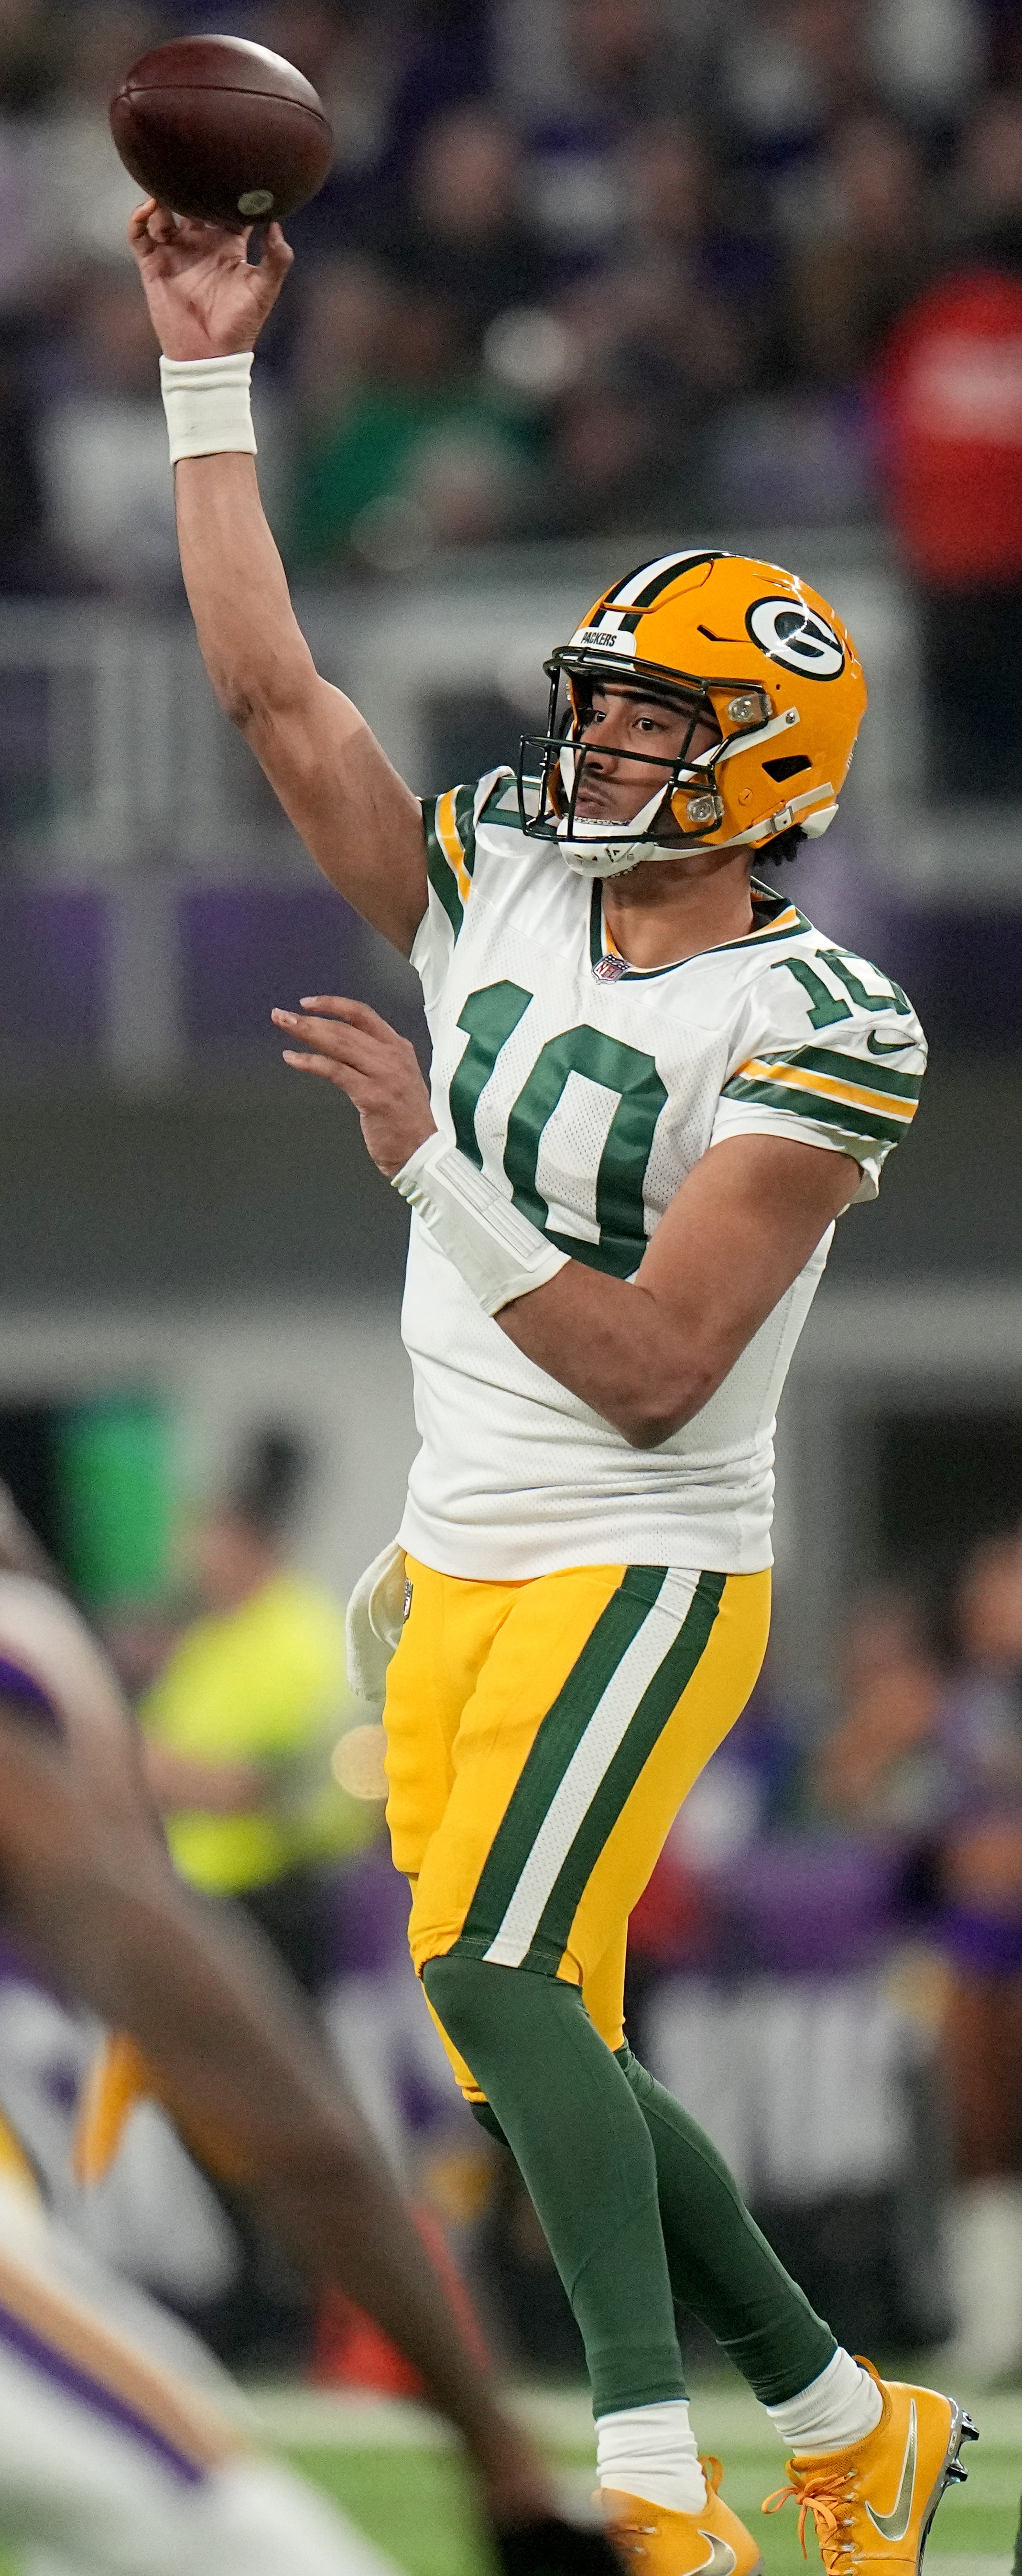 Green Bay Packers quarterback Jordan Love (10) throws a pass during the fourth quarter of their game Sunday, December 31, 2023 at U.S. Bank Stadium in Minneapolis, Minnesota. The Green Bay Packers beat the Minnesota Vikings 33-10.